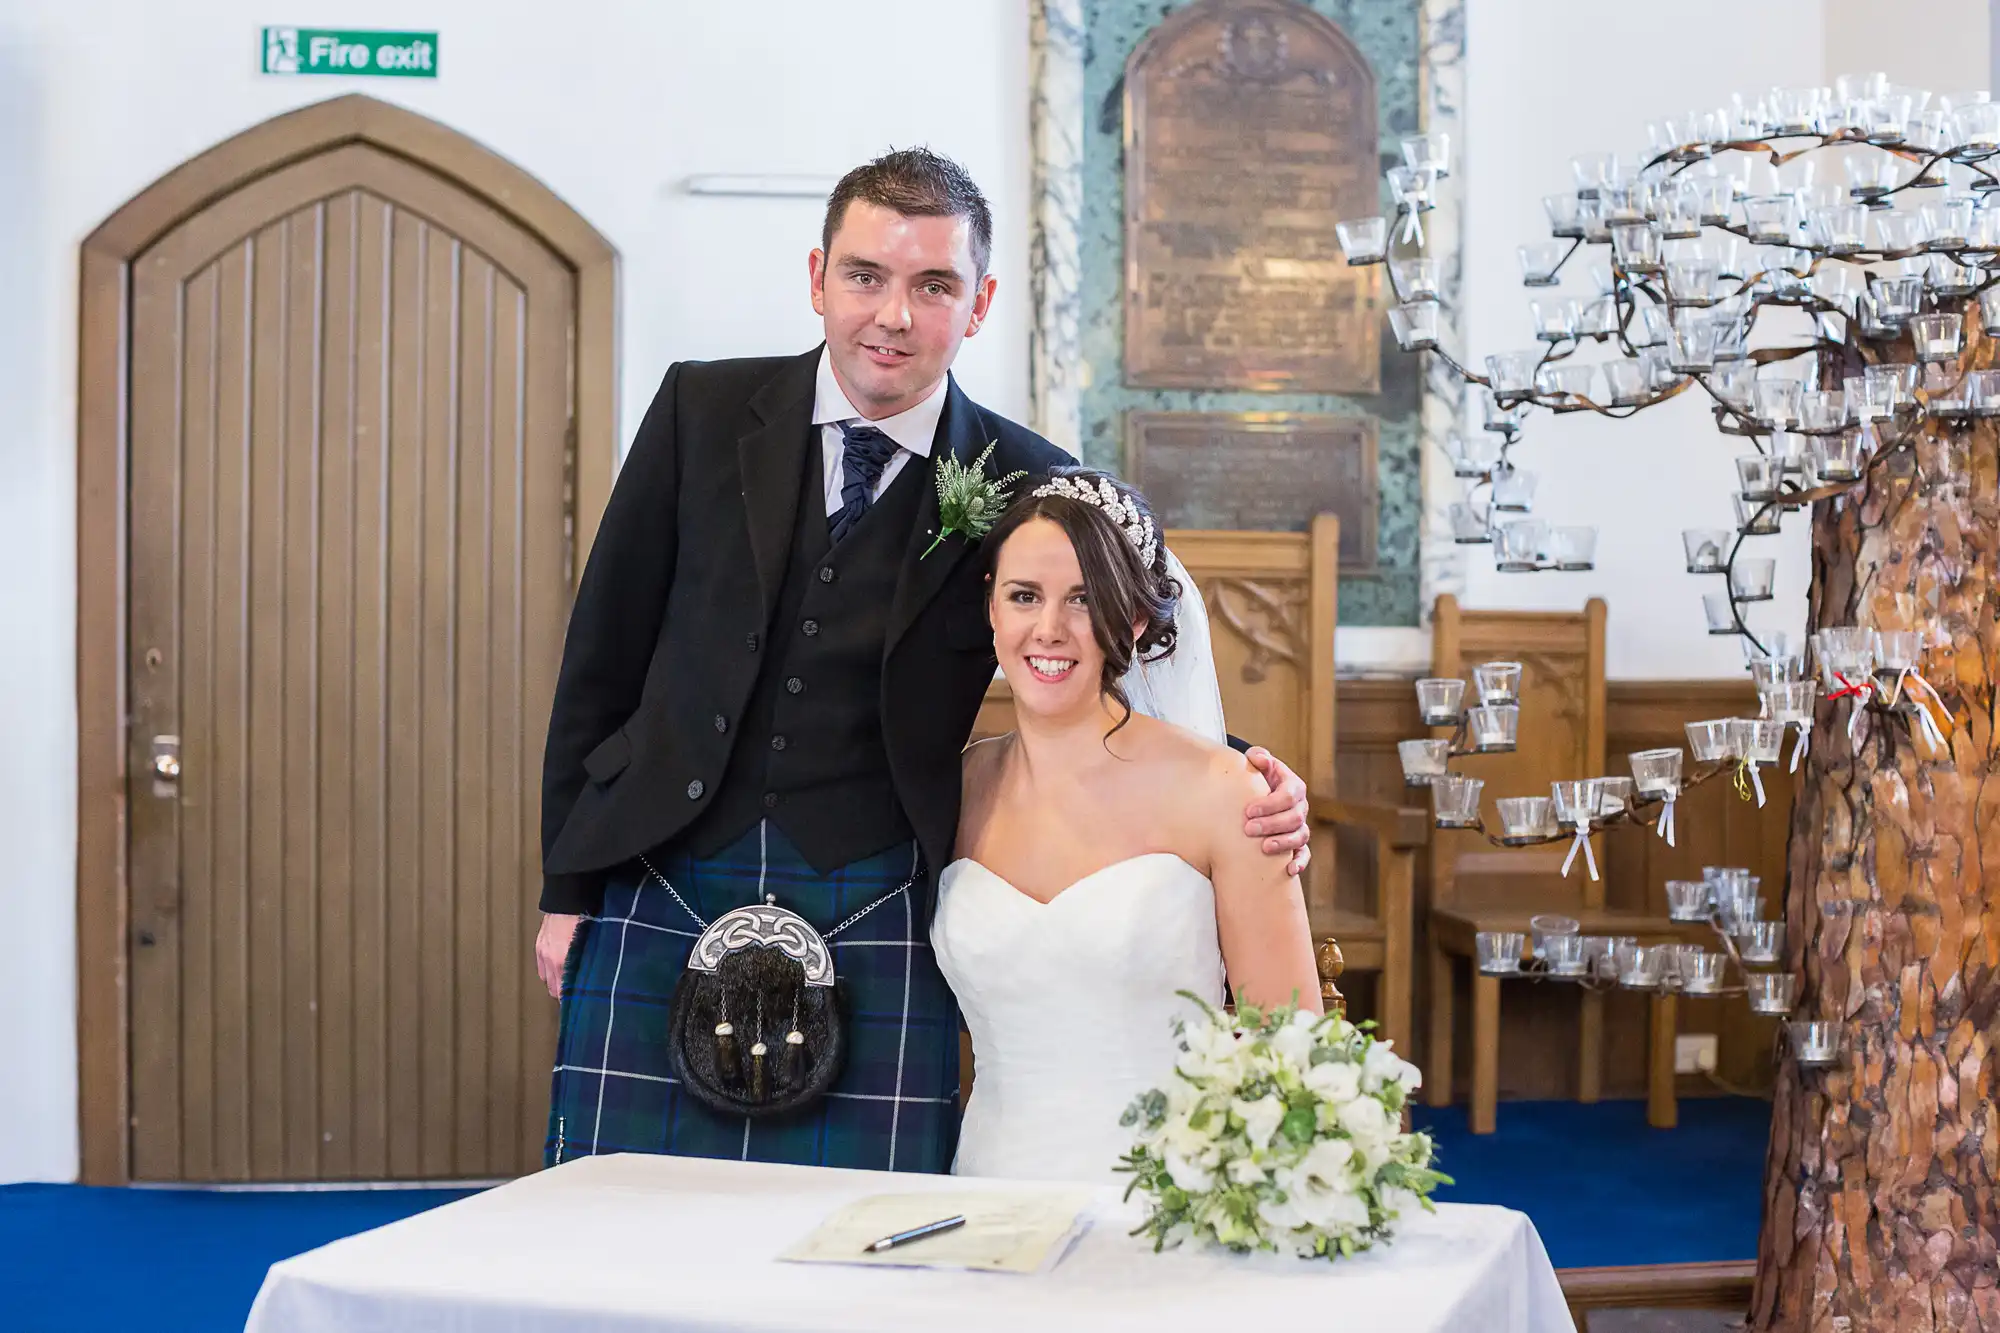 A bride and groom smiling at the camera in a church, the groom in a kilt and the bride holding a bouquet.